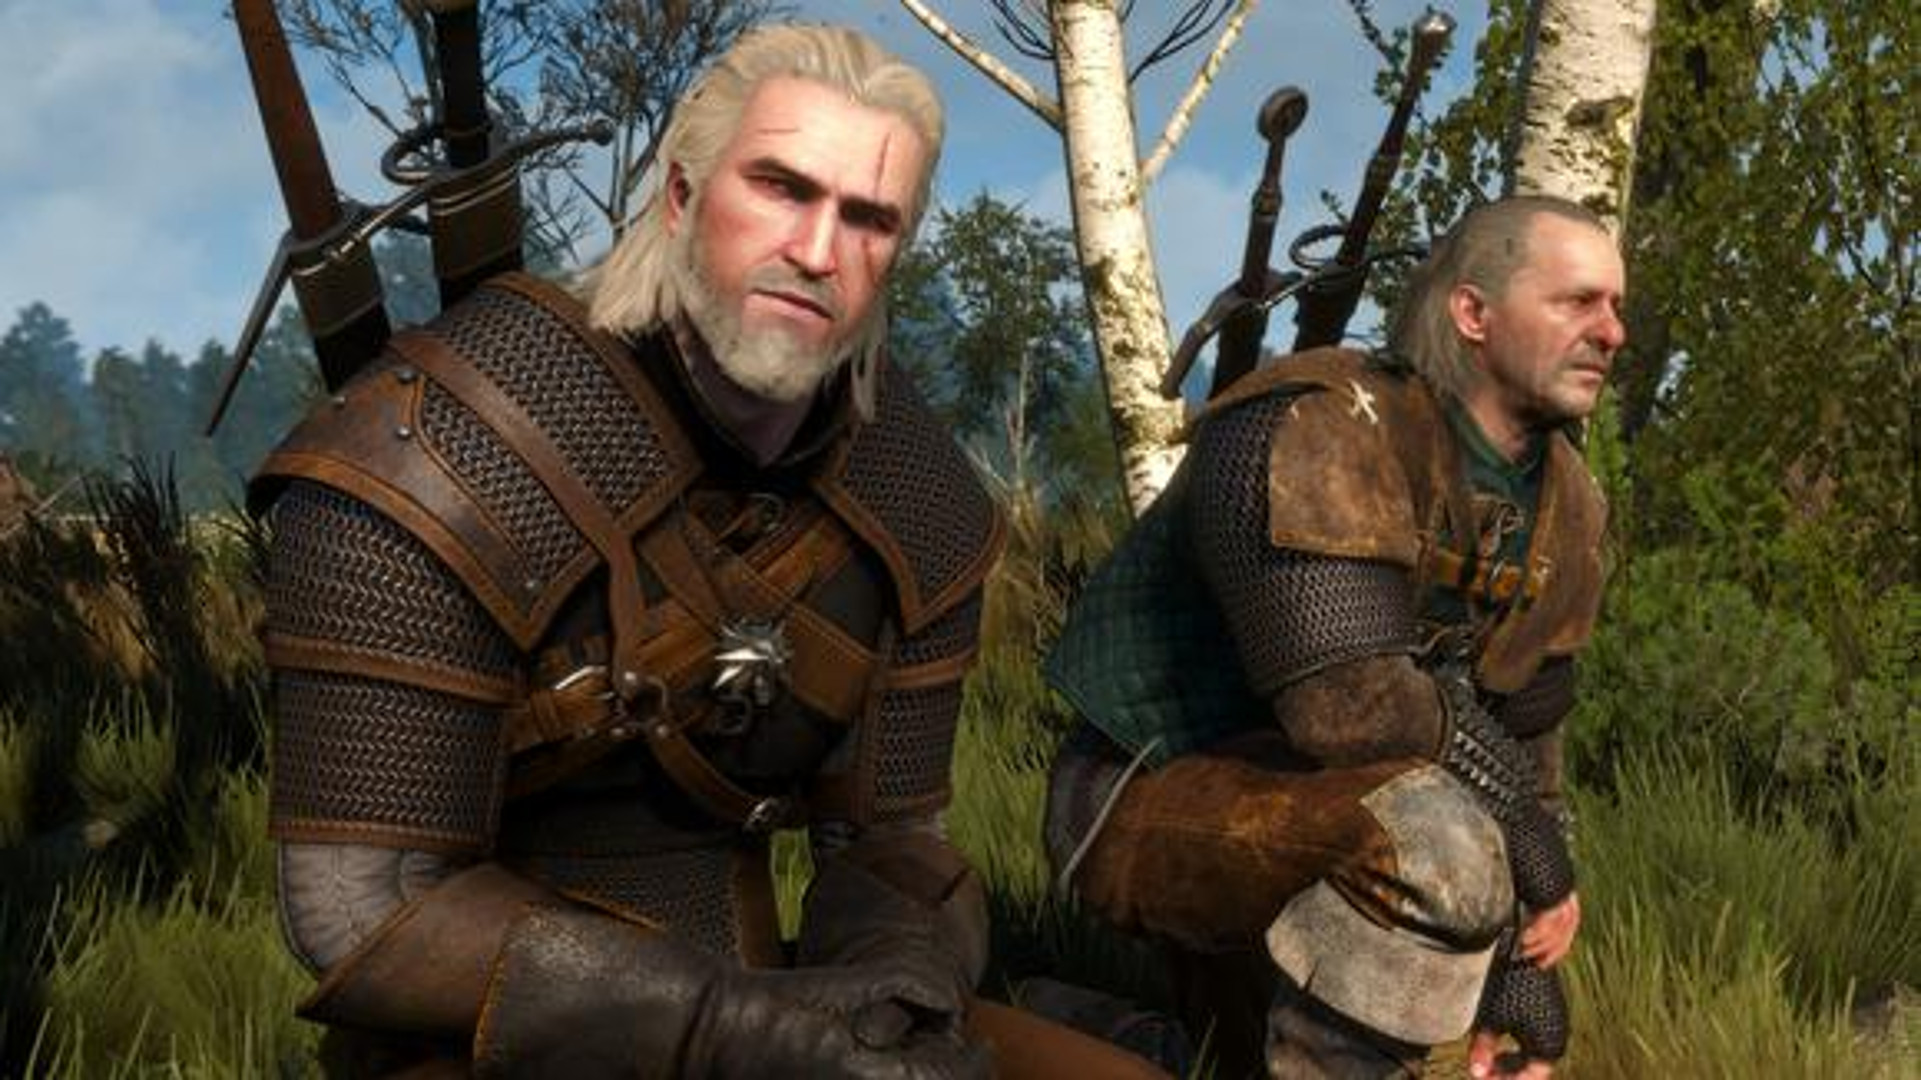 The Witcher: Nightmare of the Wolf heads up Netflix’s upcoming anime plans